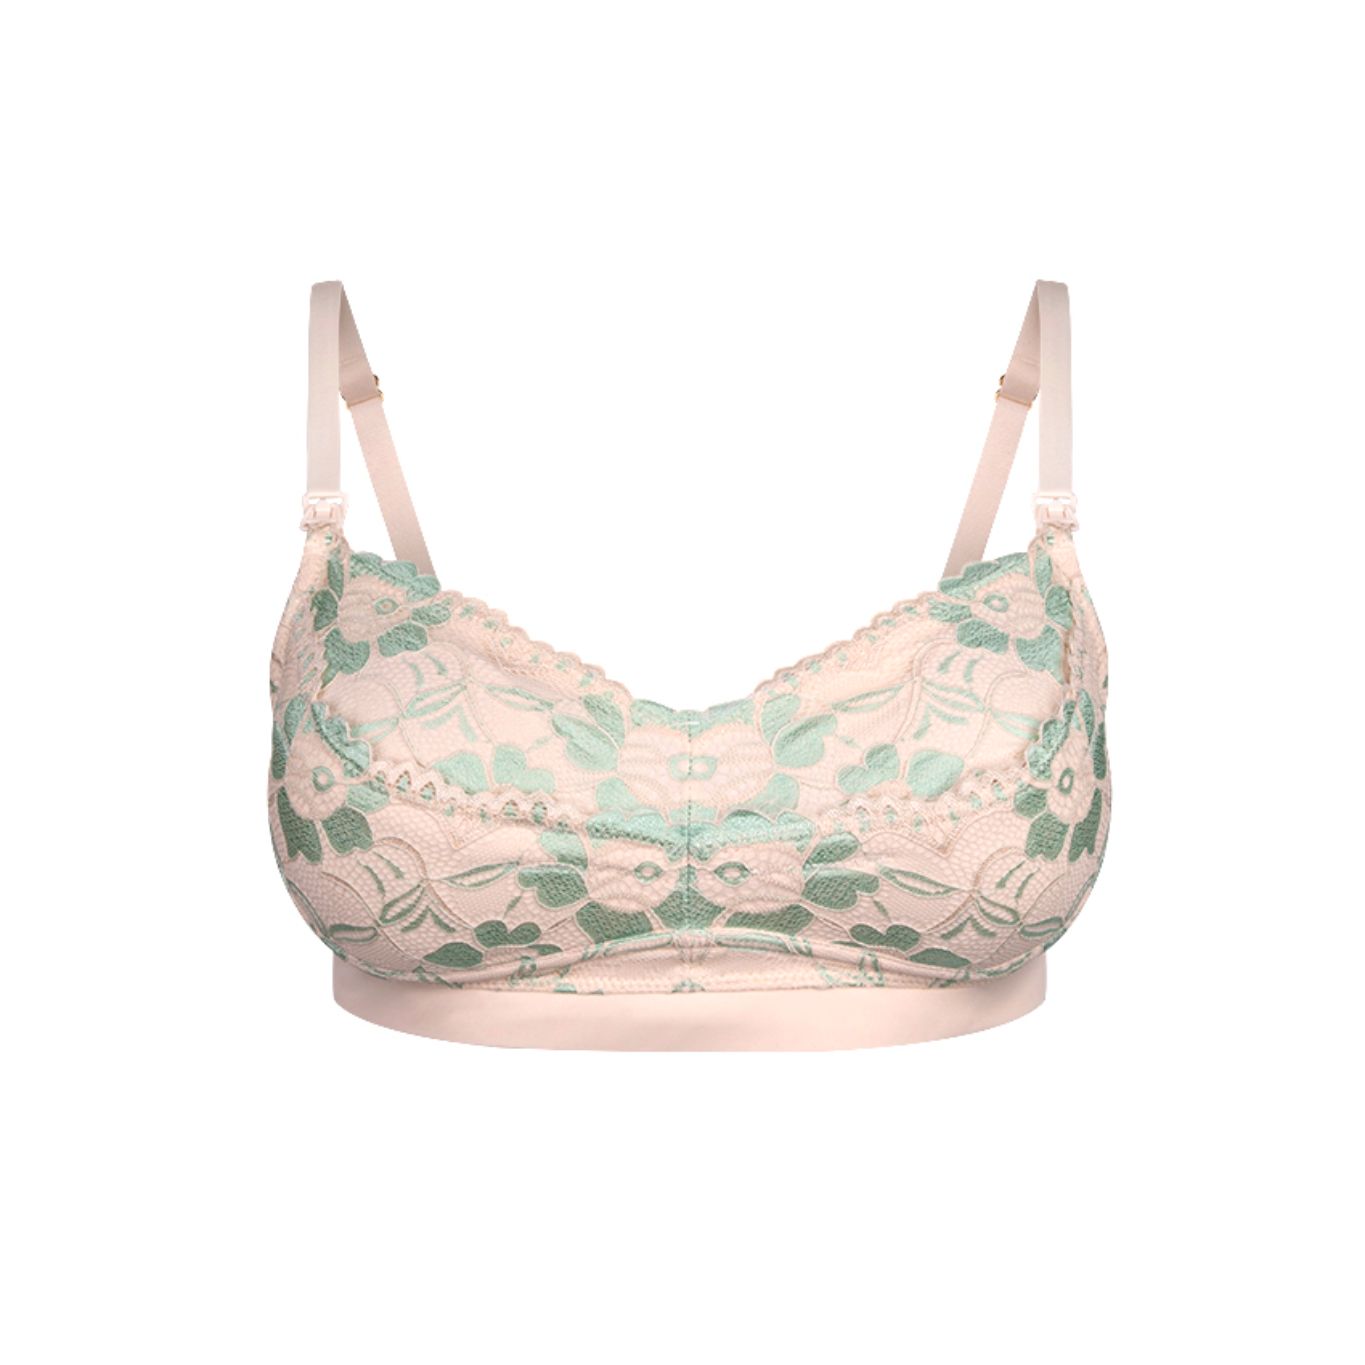 The Dairy Fairy Ayla Underwire Nursing & Hands Free Pumping Bra In Seashell